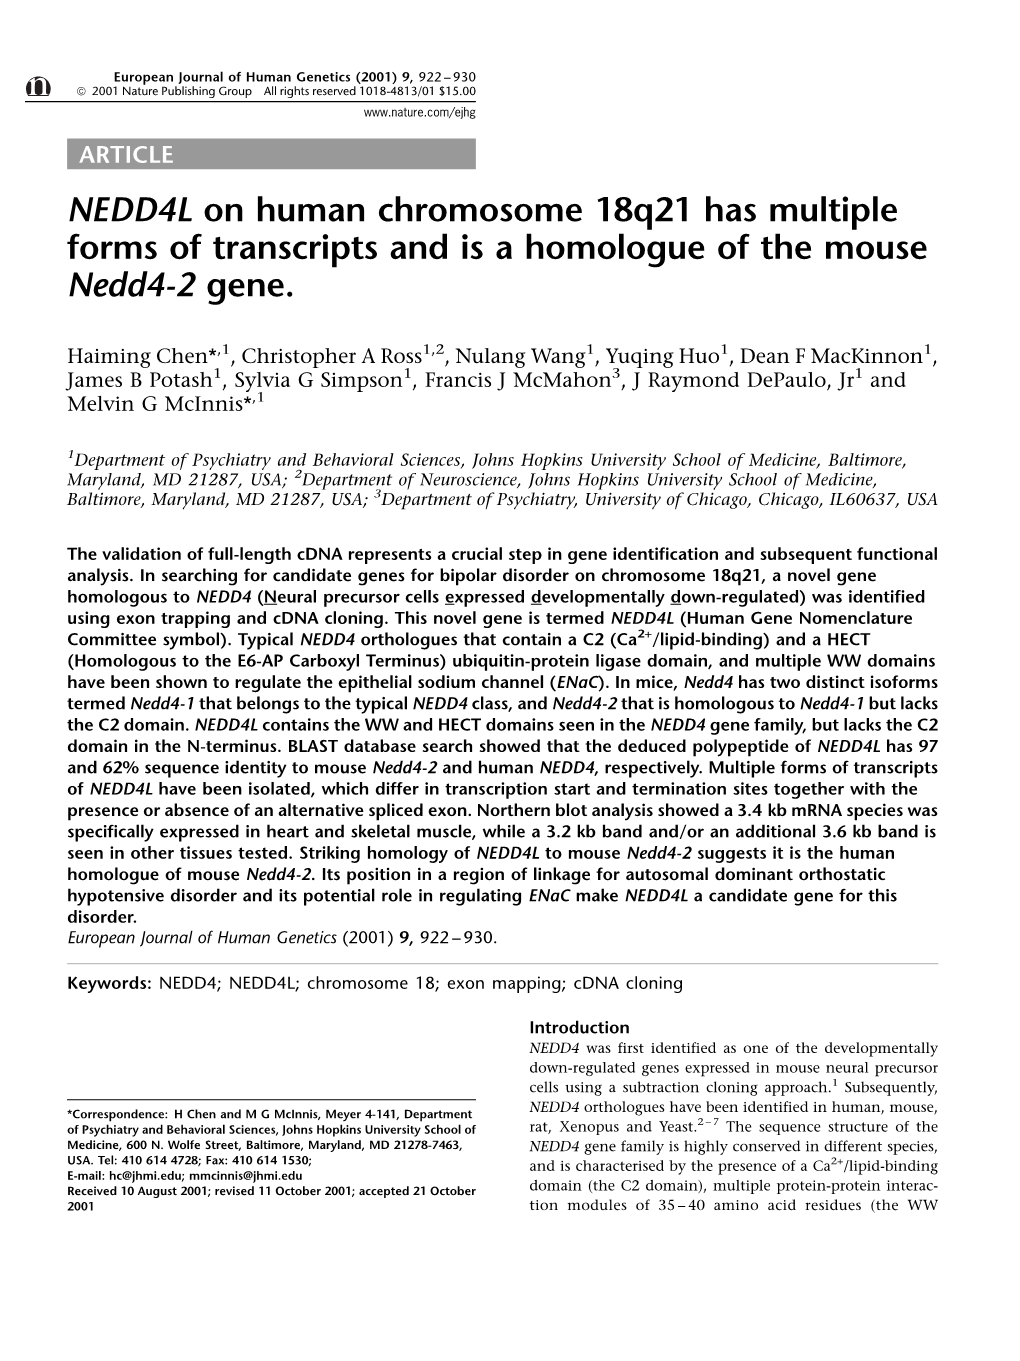 NEDD4L on Human Chromosome 18Q21 Has Multiple Forms of Transcripts and Is a Homologue of the Mouse Nedd4-2 Gene